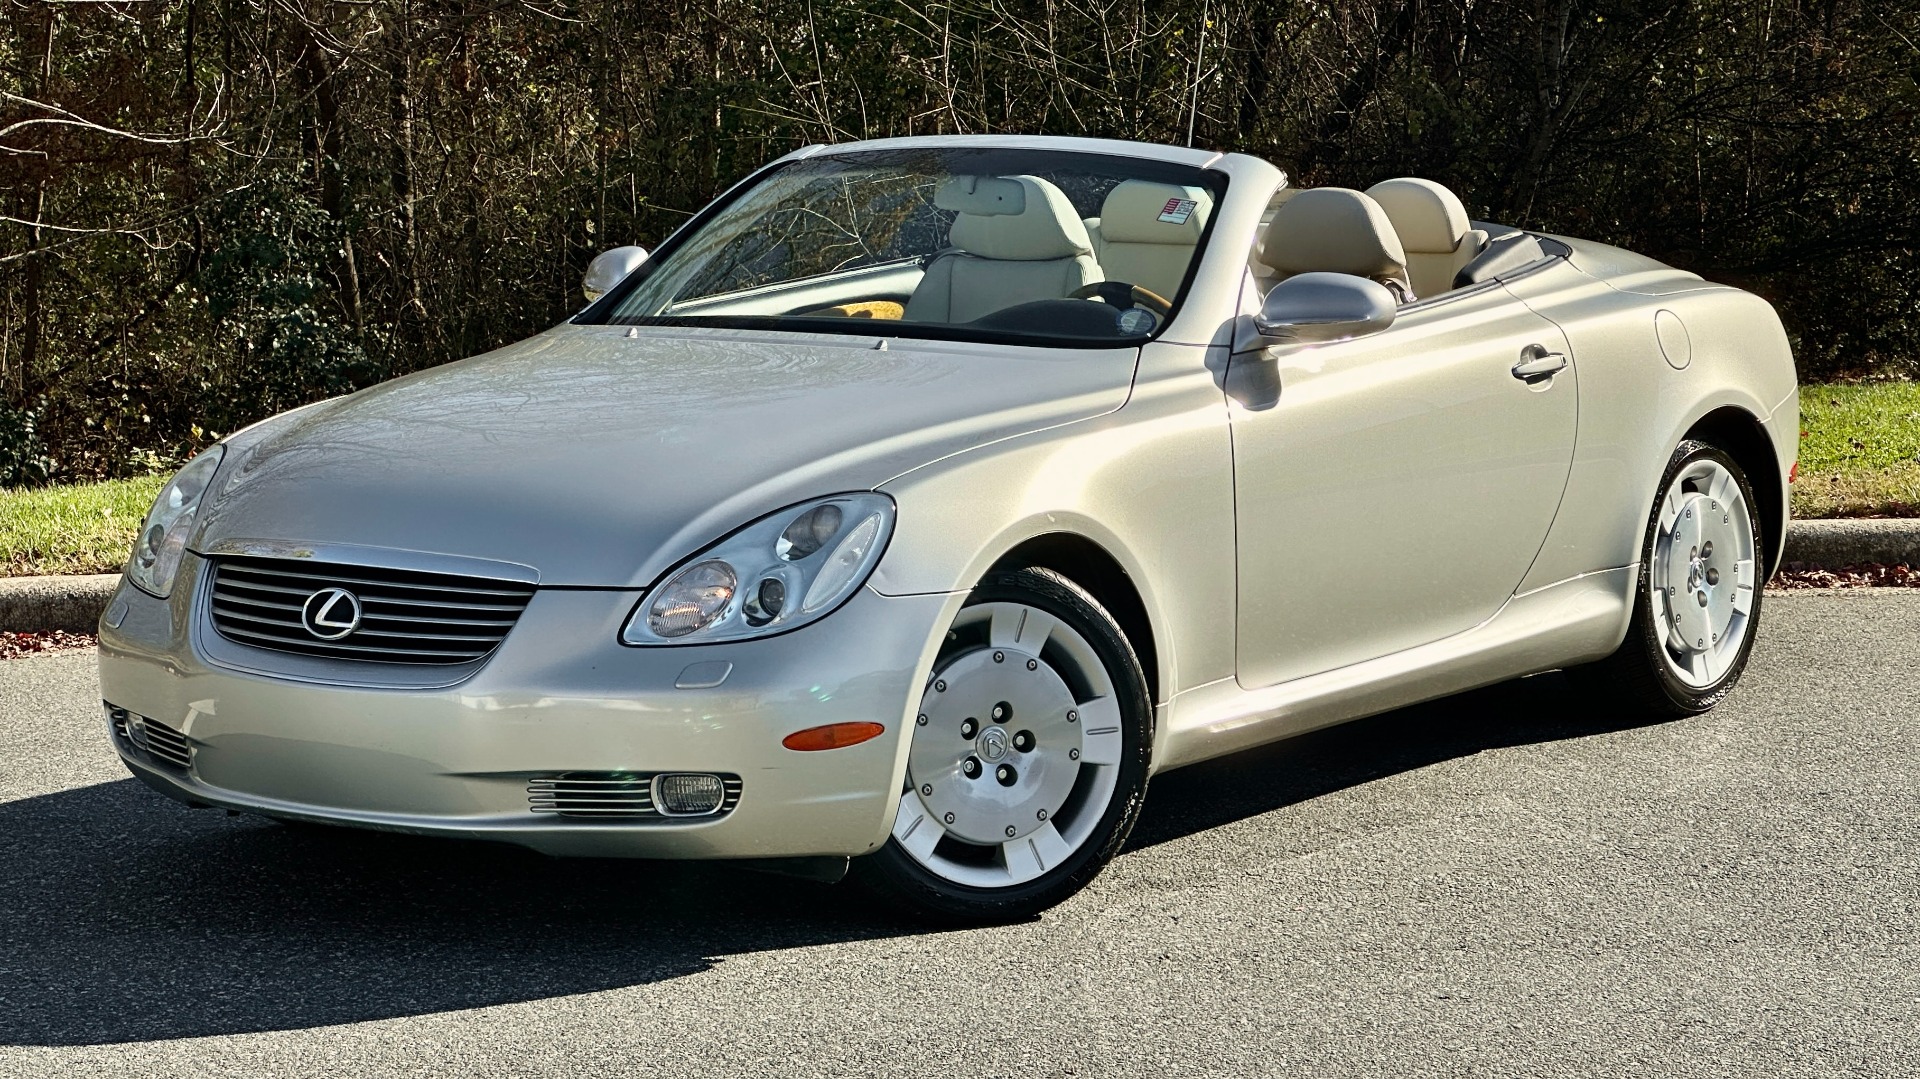 Used 2003 Lexus SC 430 HARD TOP CONVERTIBLE / TAN LEATHER INTERIOR / LOW  MILES / 4.3L V8 ENGINE For Sale ($22,995) | Formula Imports Stock #FC12528